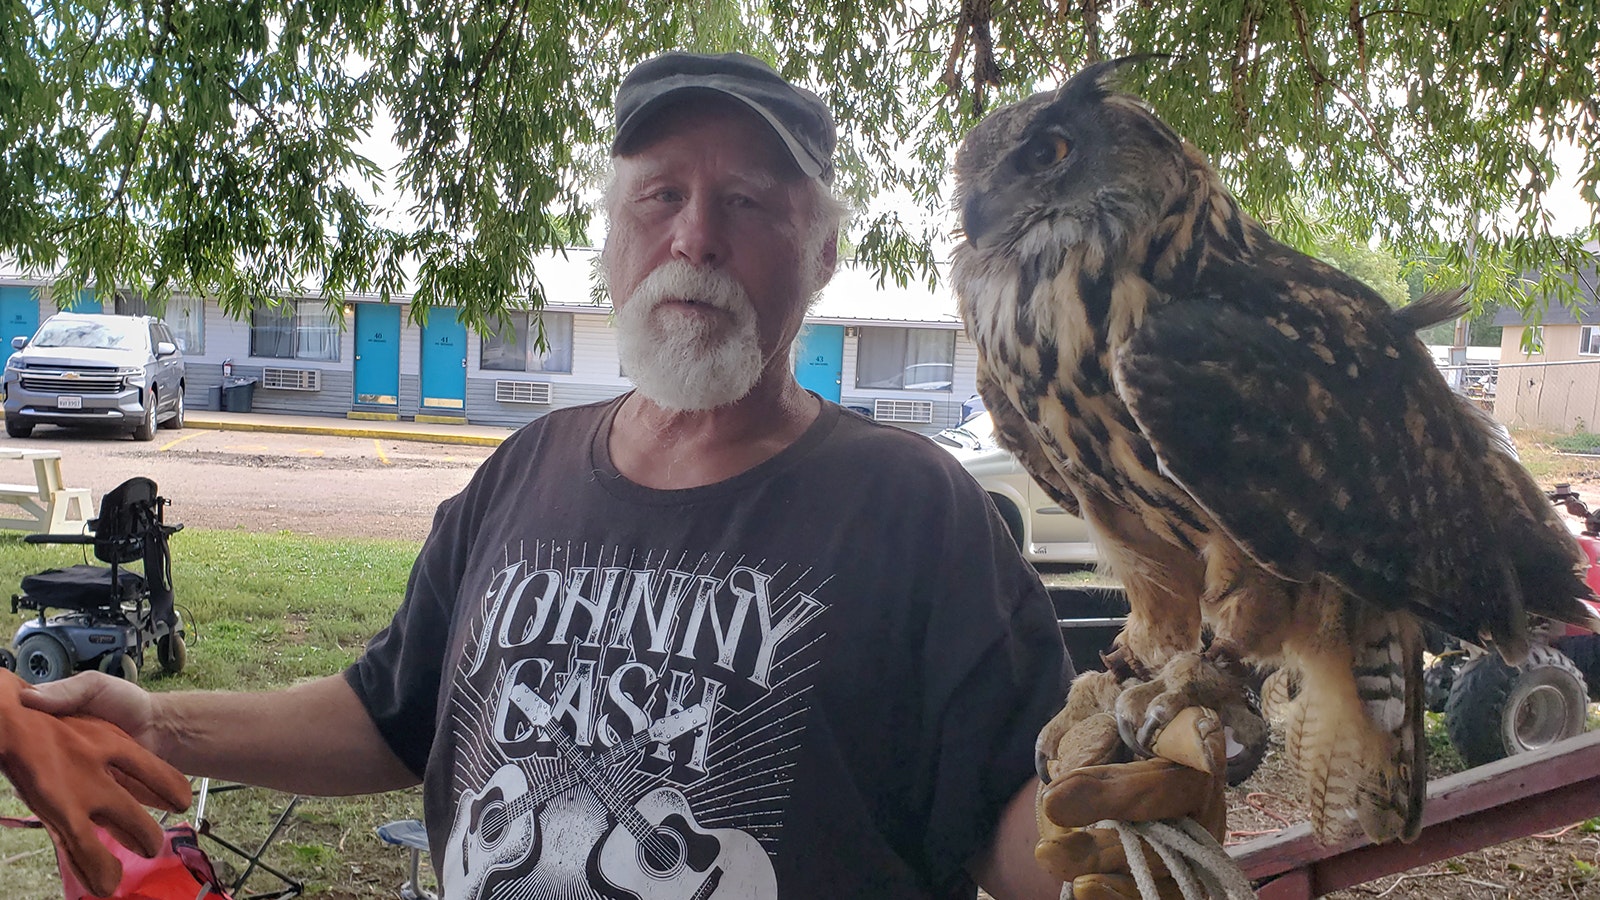 Jeff Shelburg has been training birds of prey since he was 9 years old, starting with a red tail hawk.